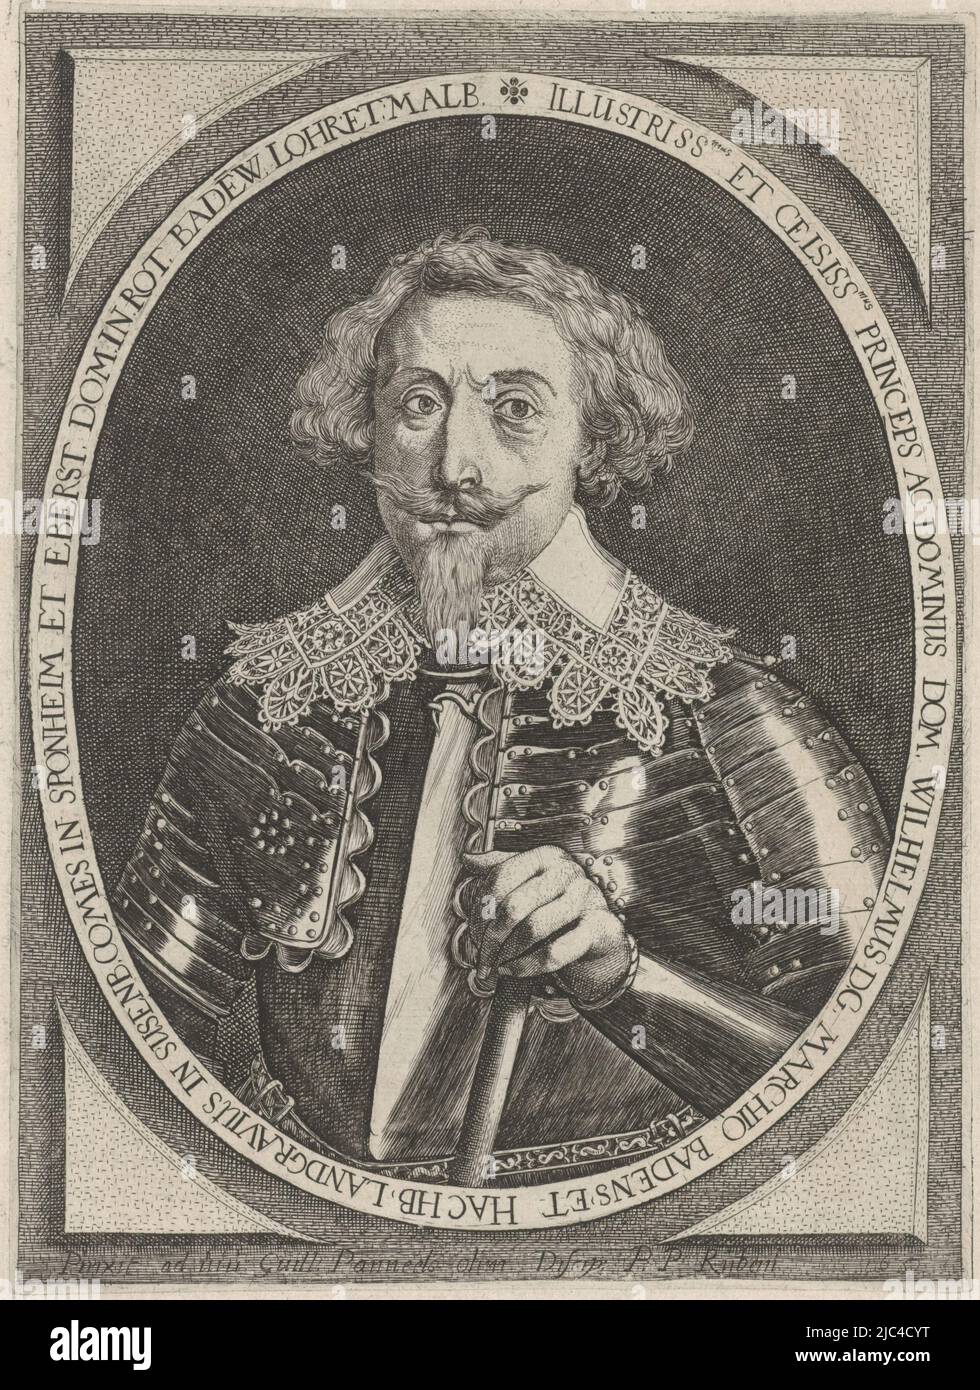 Bust portrait of William, Margrave of Baden, in armor. With his left hand he rests on a command staff. The portrait is framed in an oval frame with square border work and edge lettering in Latin., Portrait of William, Margrave of Baden, print maker: Willem Panneels, after: Willem Panneels, (mentioned on object), Straatsburg, 1632, paper, engraving, etching, h 183 mm × w 138 mm Stock Photo